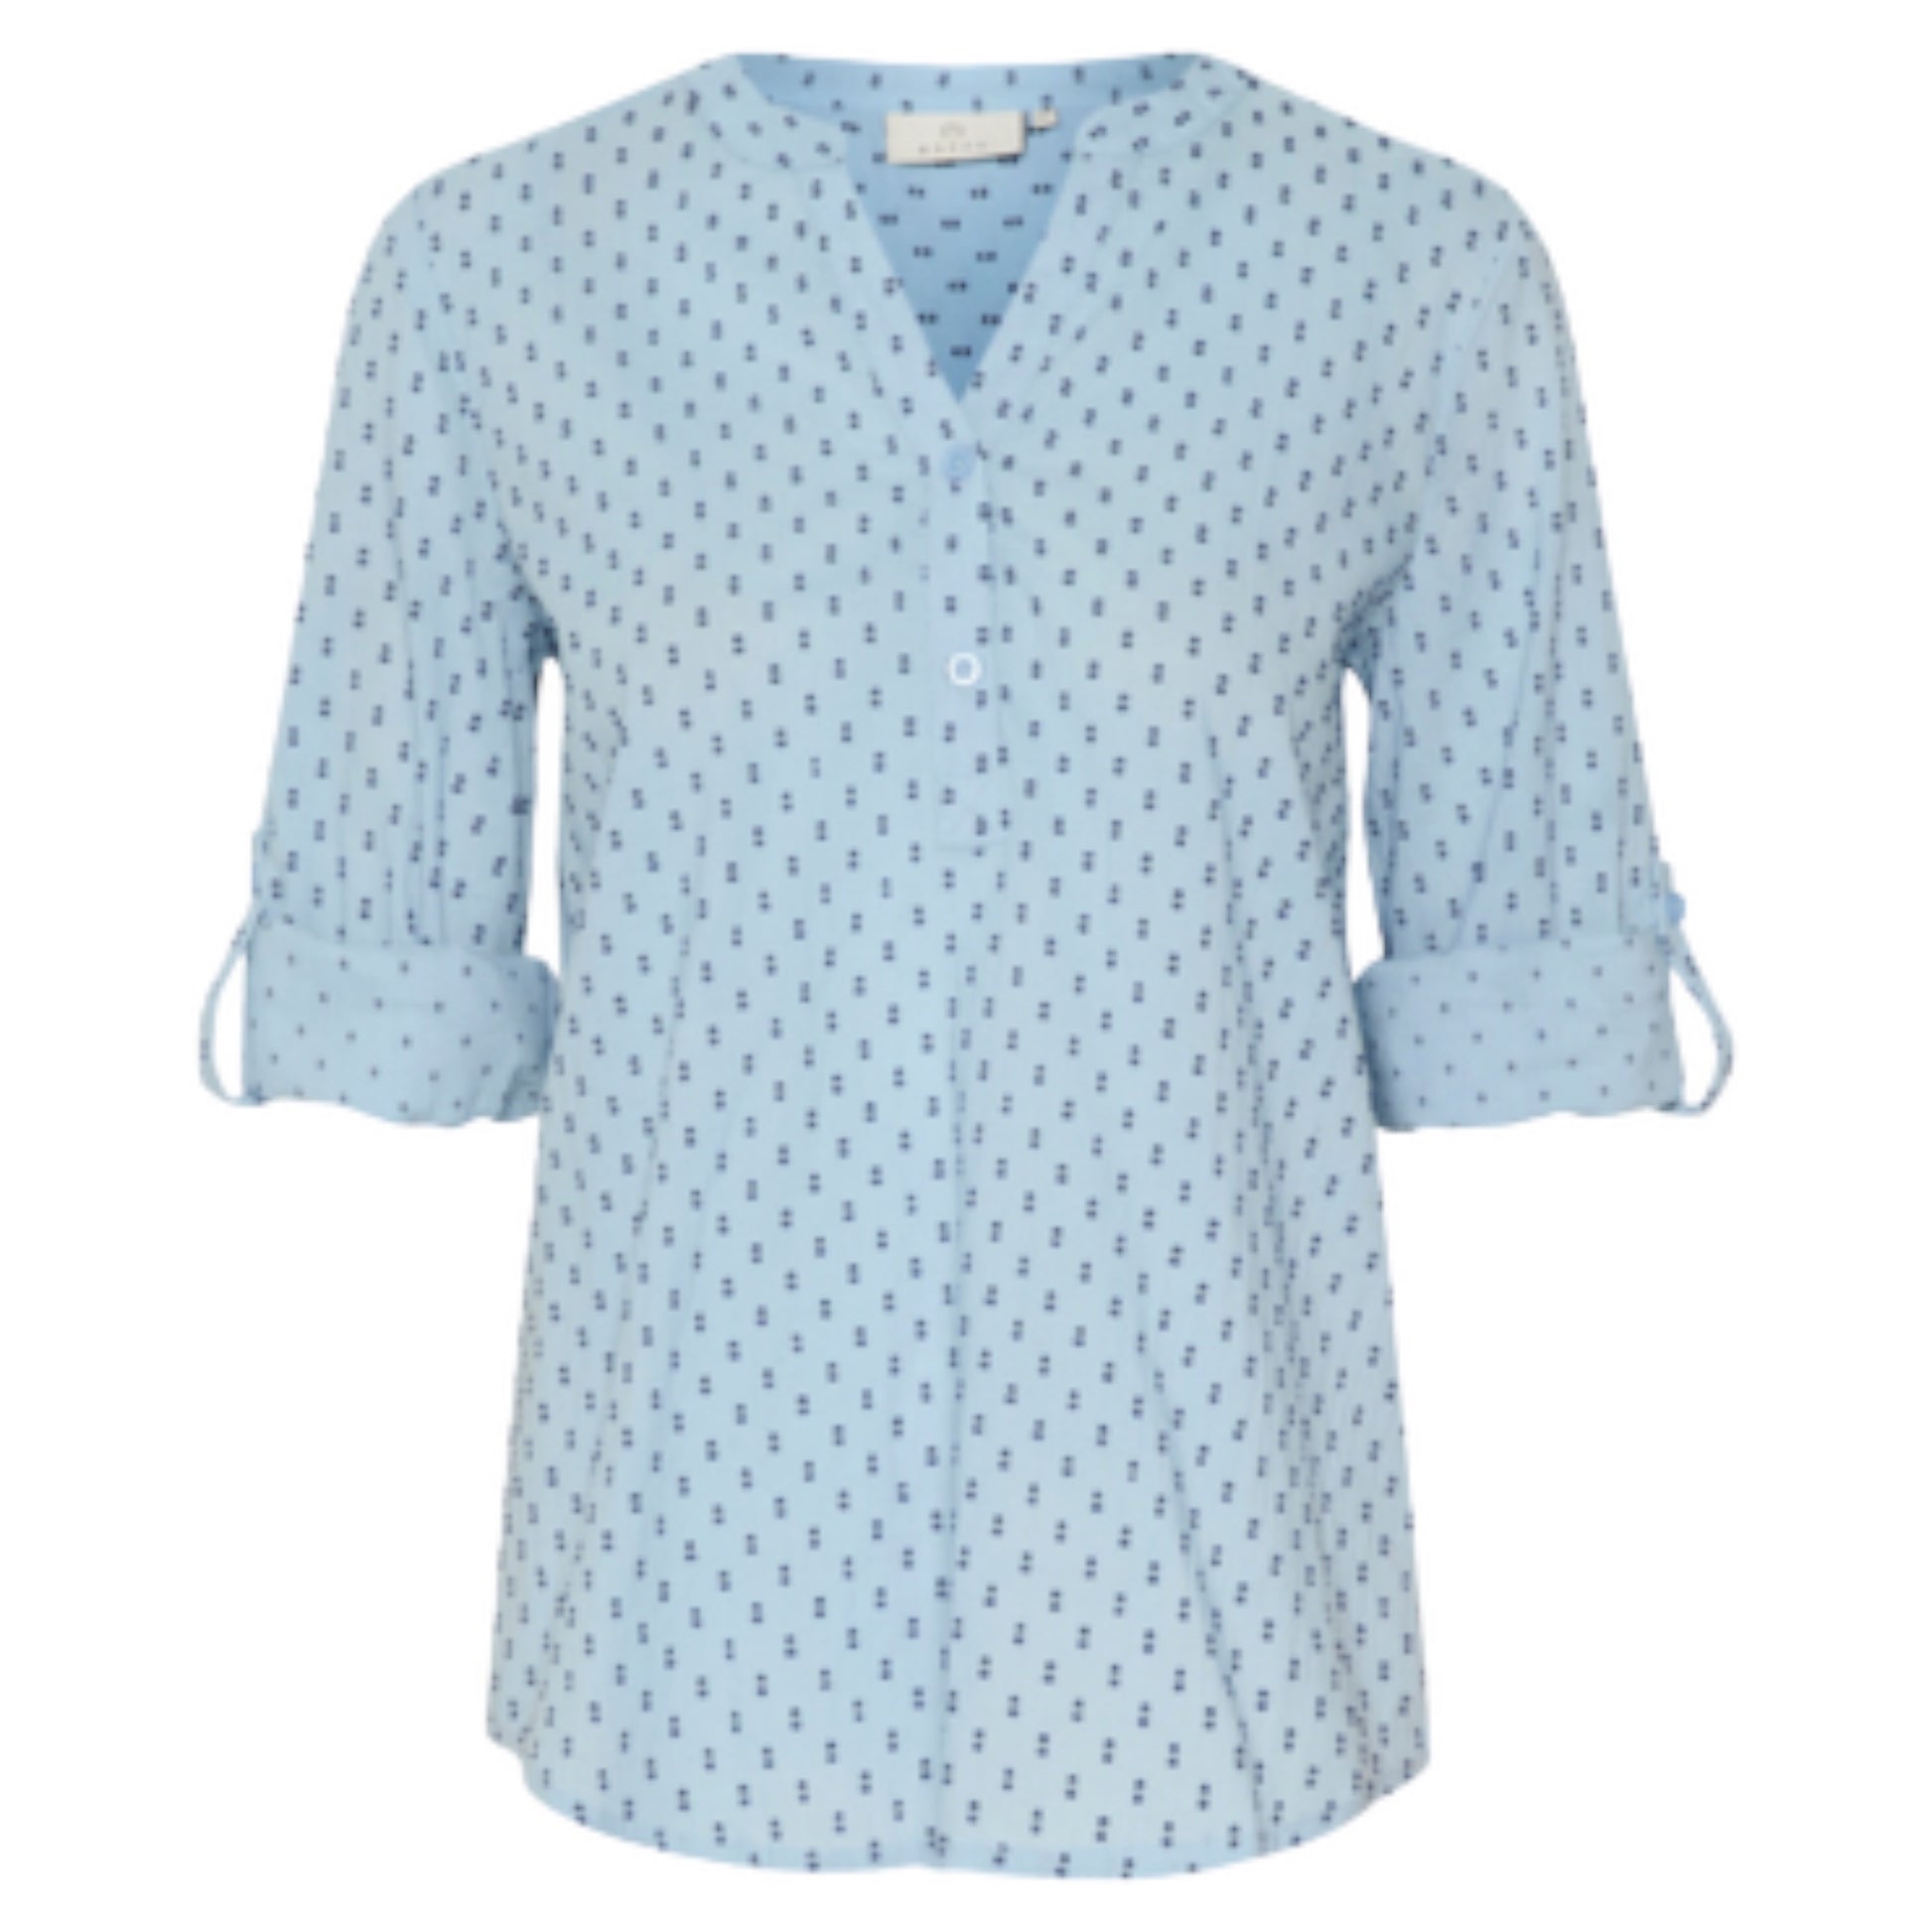 Conker Boutique Kaffe Silona Cotton Blouse in Faded Denim Front View